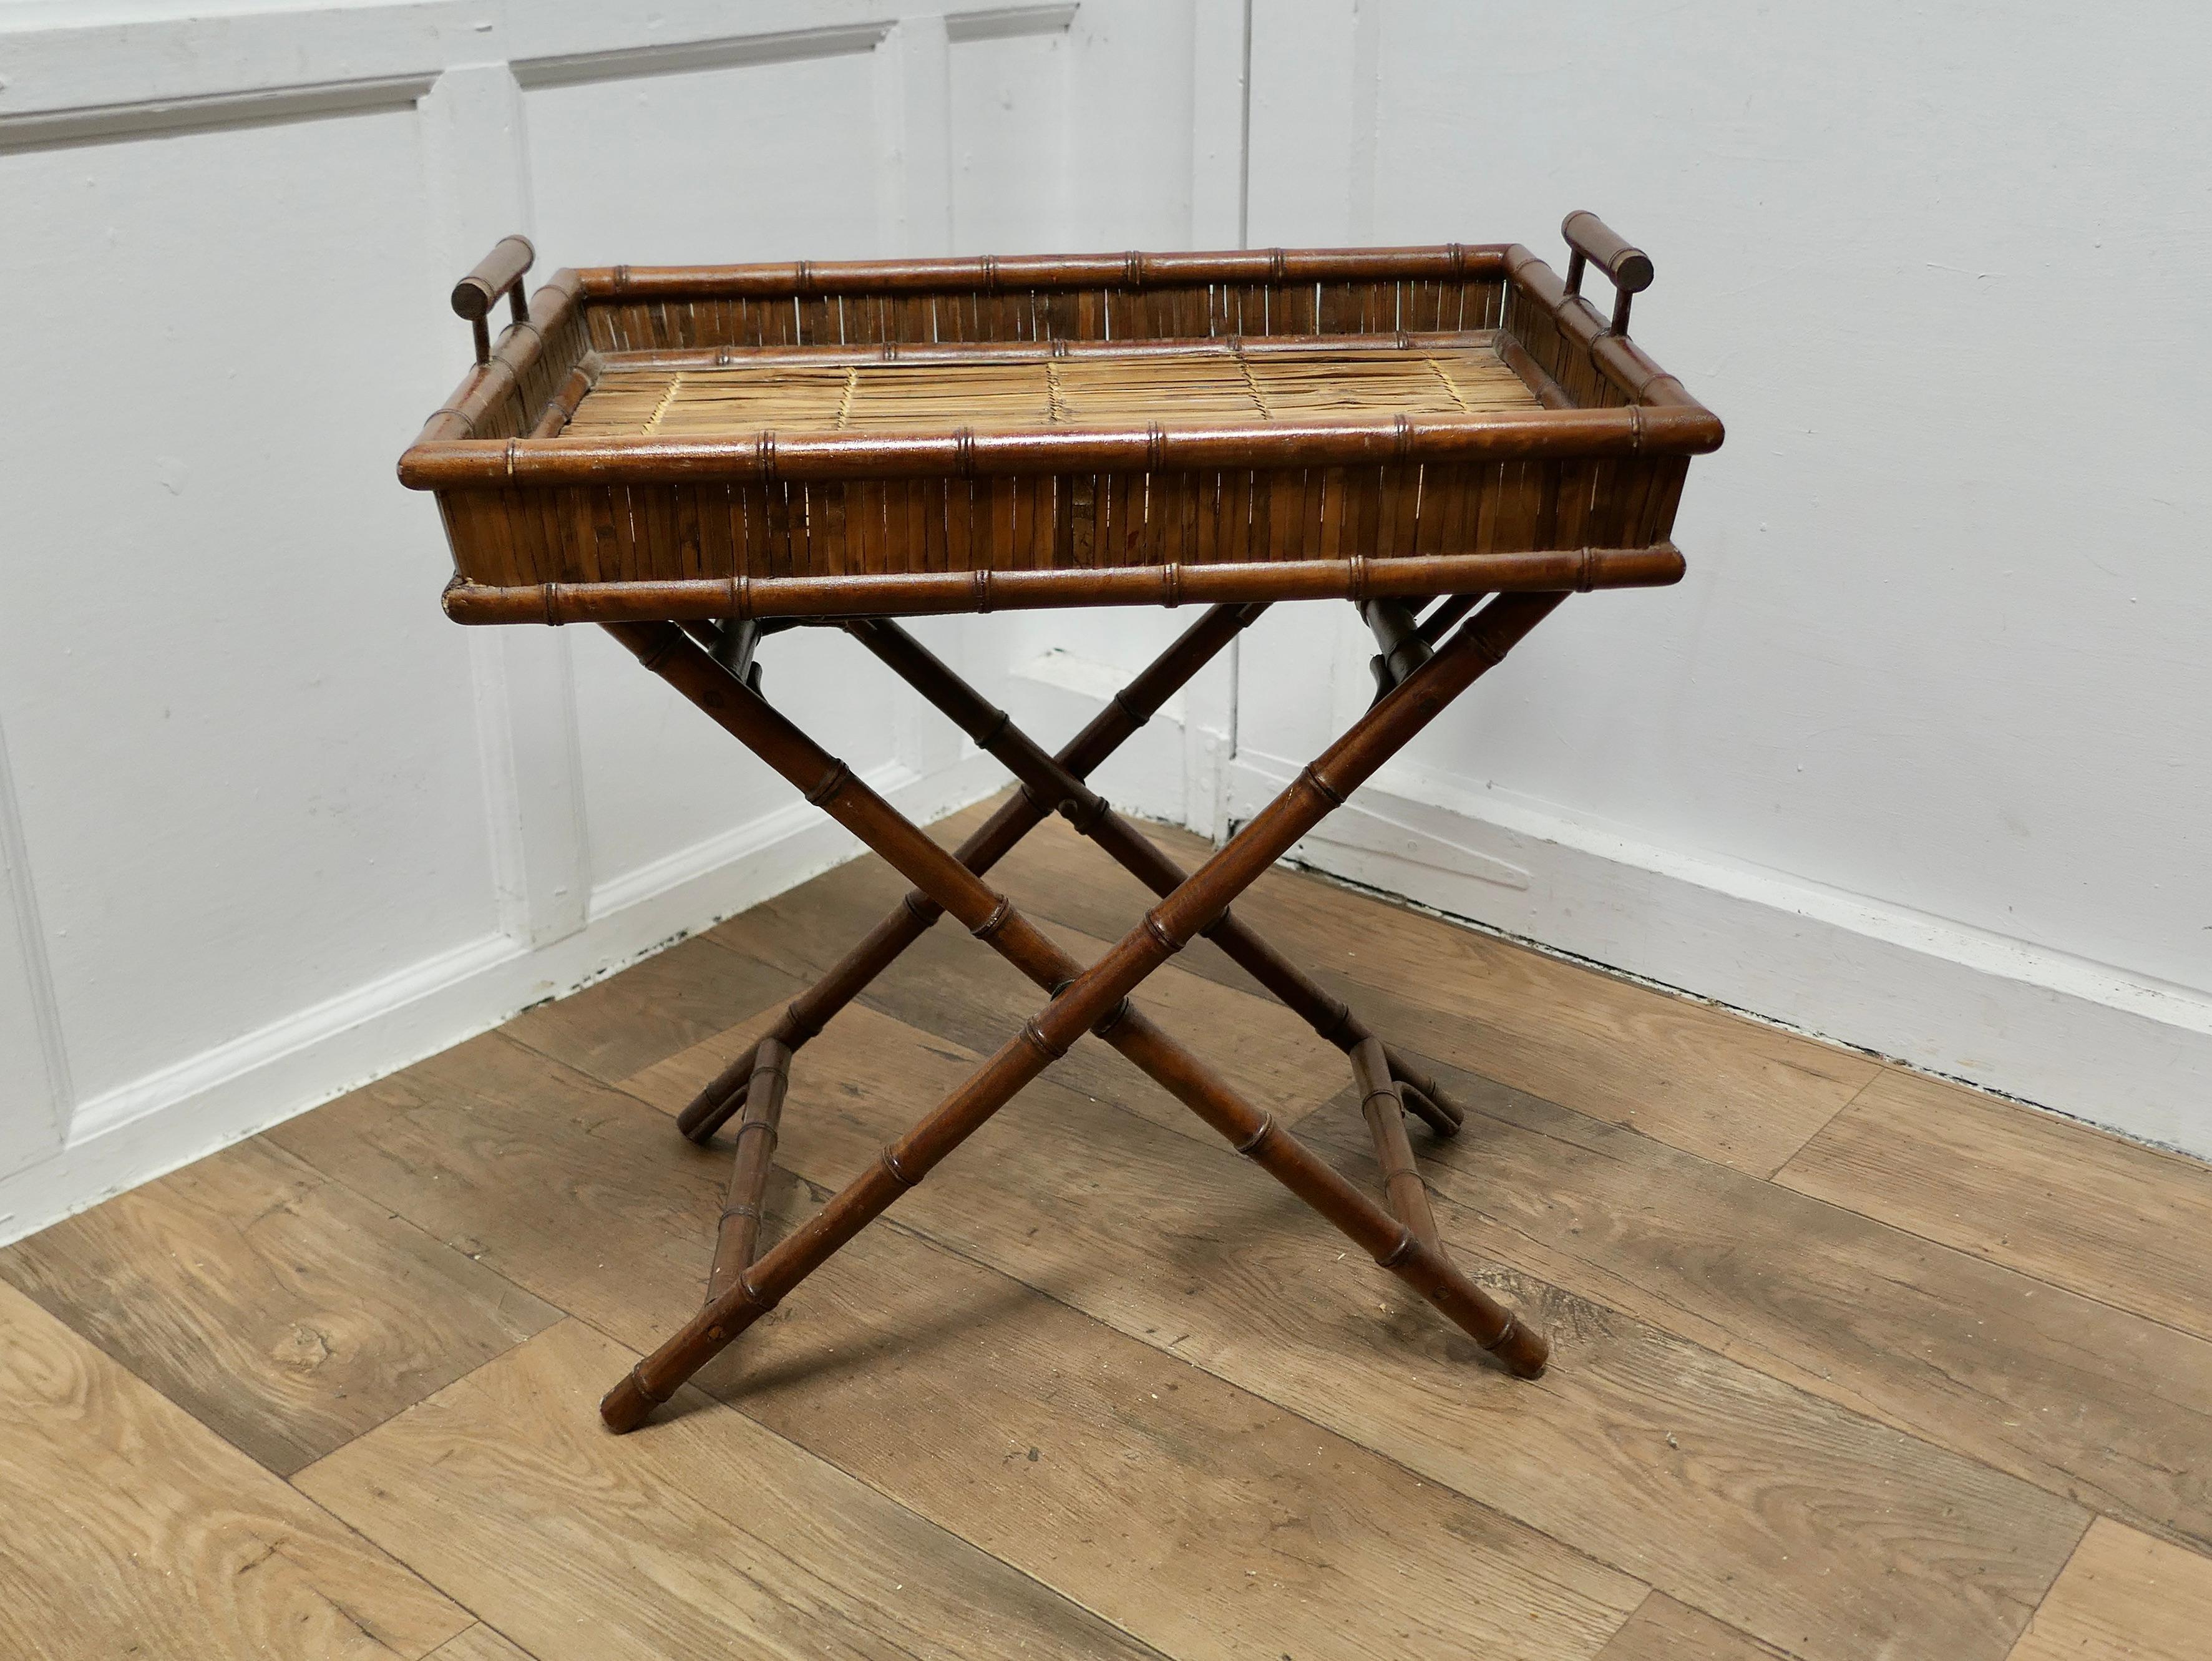 Bamboo Butlers Tray on Stand

This is a superb quality piece, the tray top fits on to the folding legs forming a neat drinks table 
The frame of the tray and stand are made in faux bamboo and the rest of the tray is made in woven split bamboo